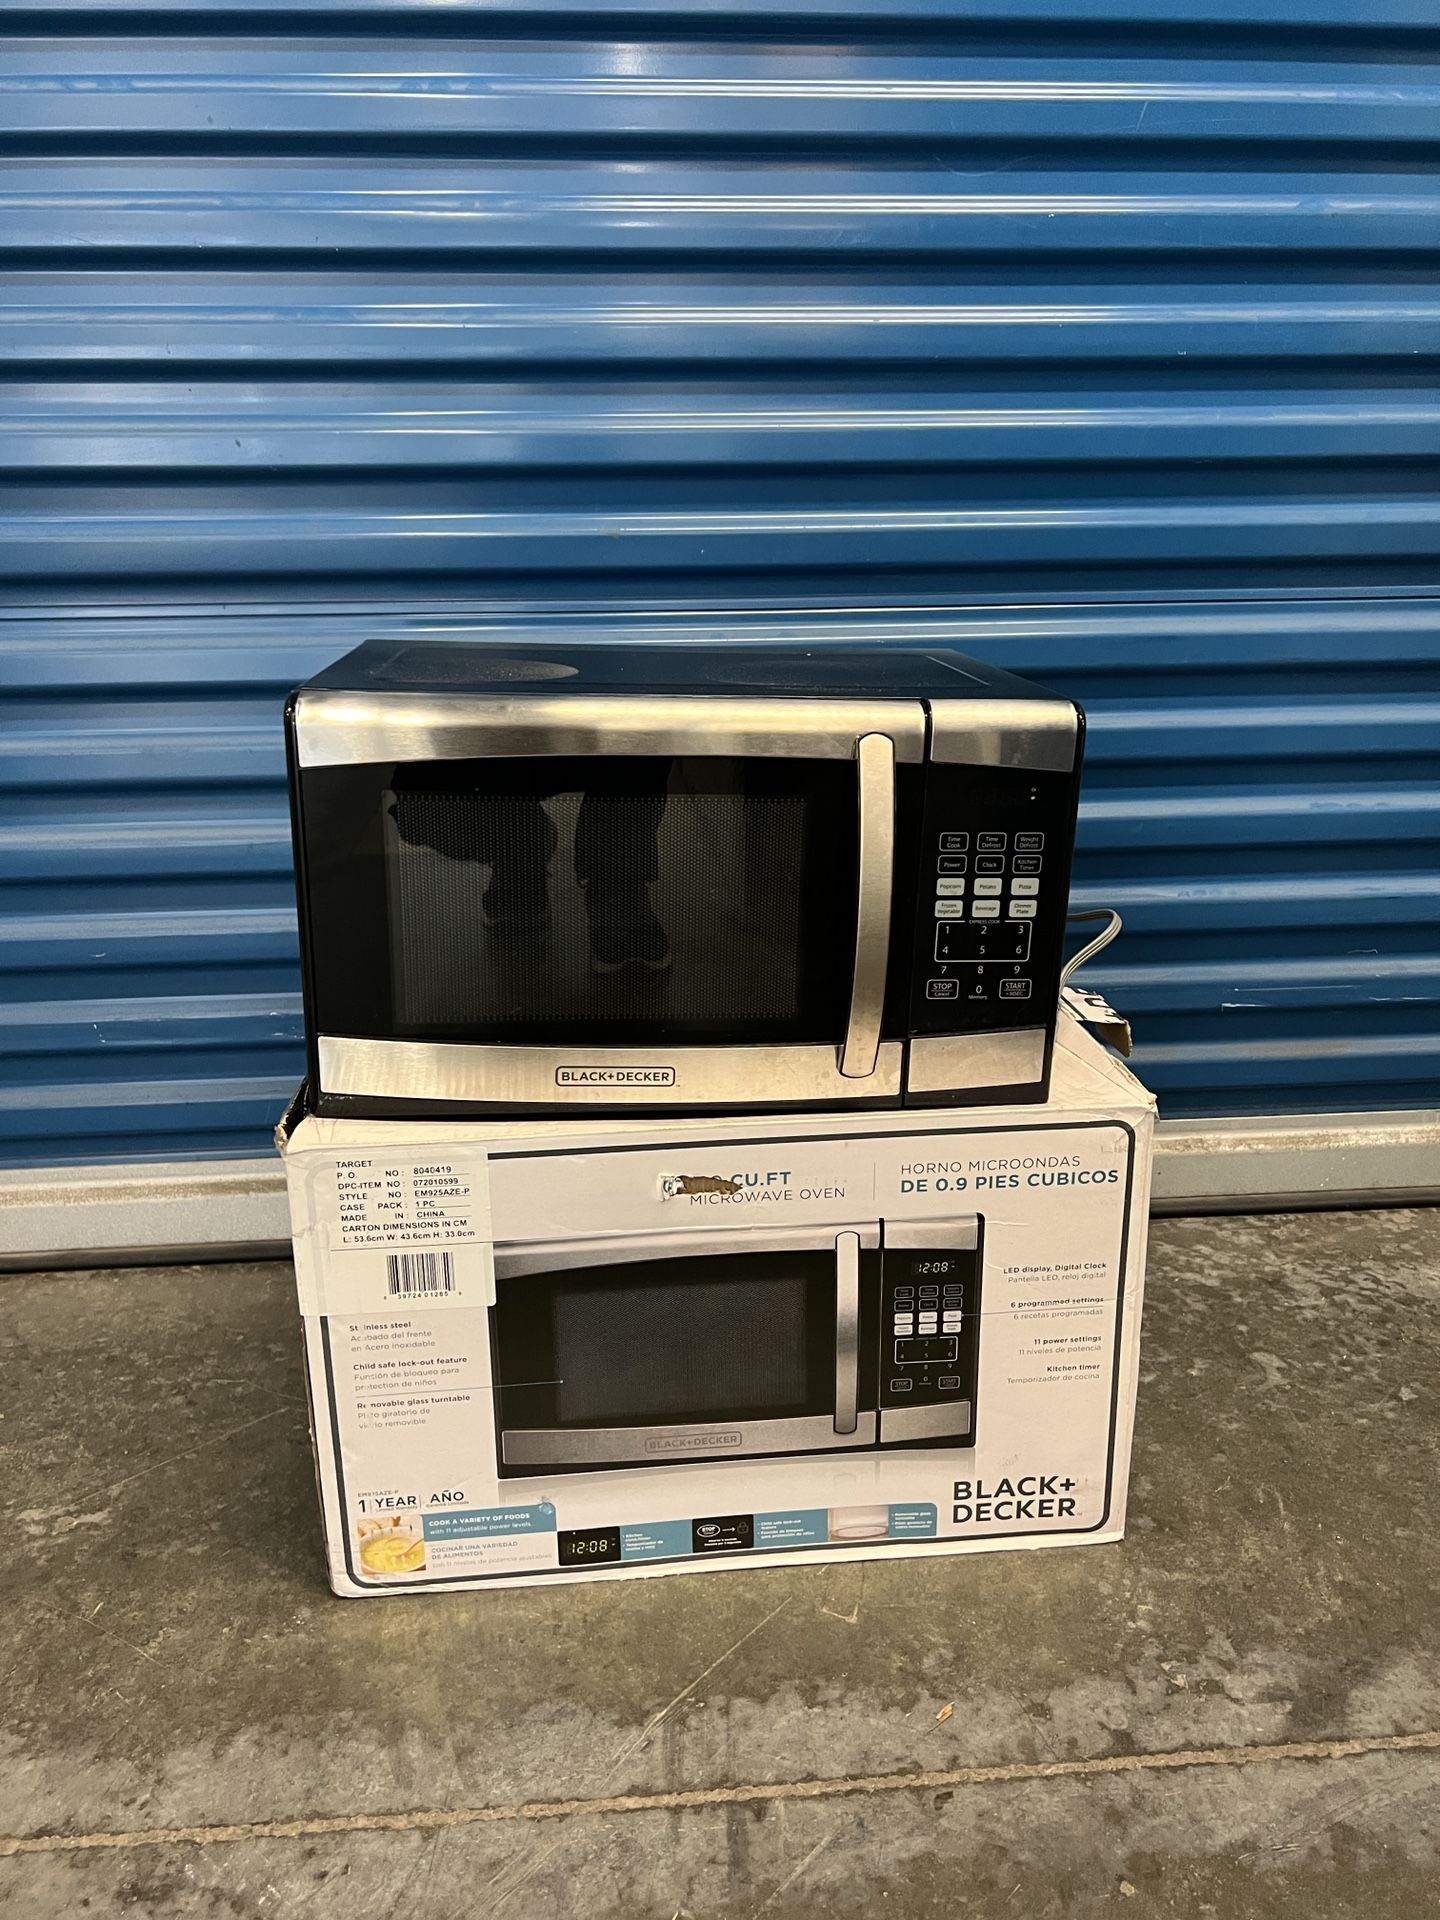 BLACK+DECKER Stainless Steel Microwave Oven for Sale in Garden Grove, CA -  OfferUp